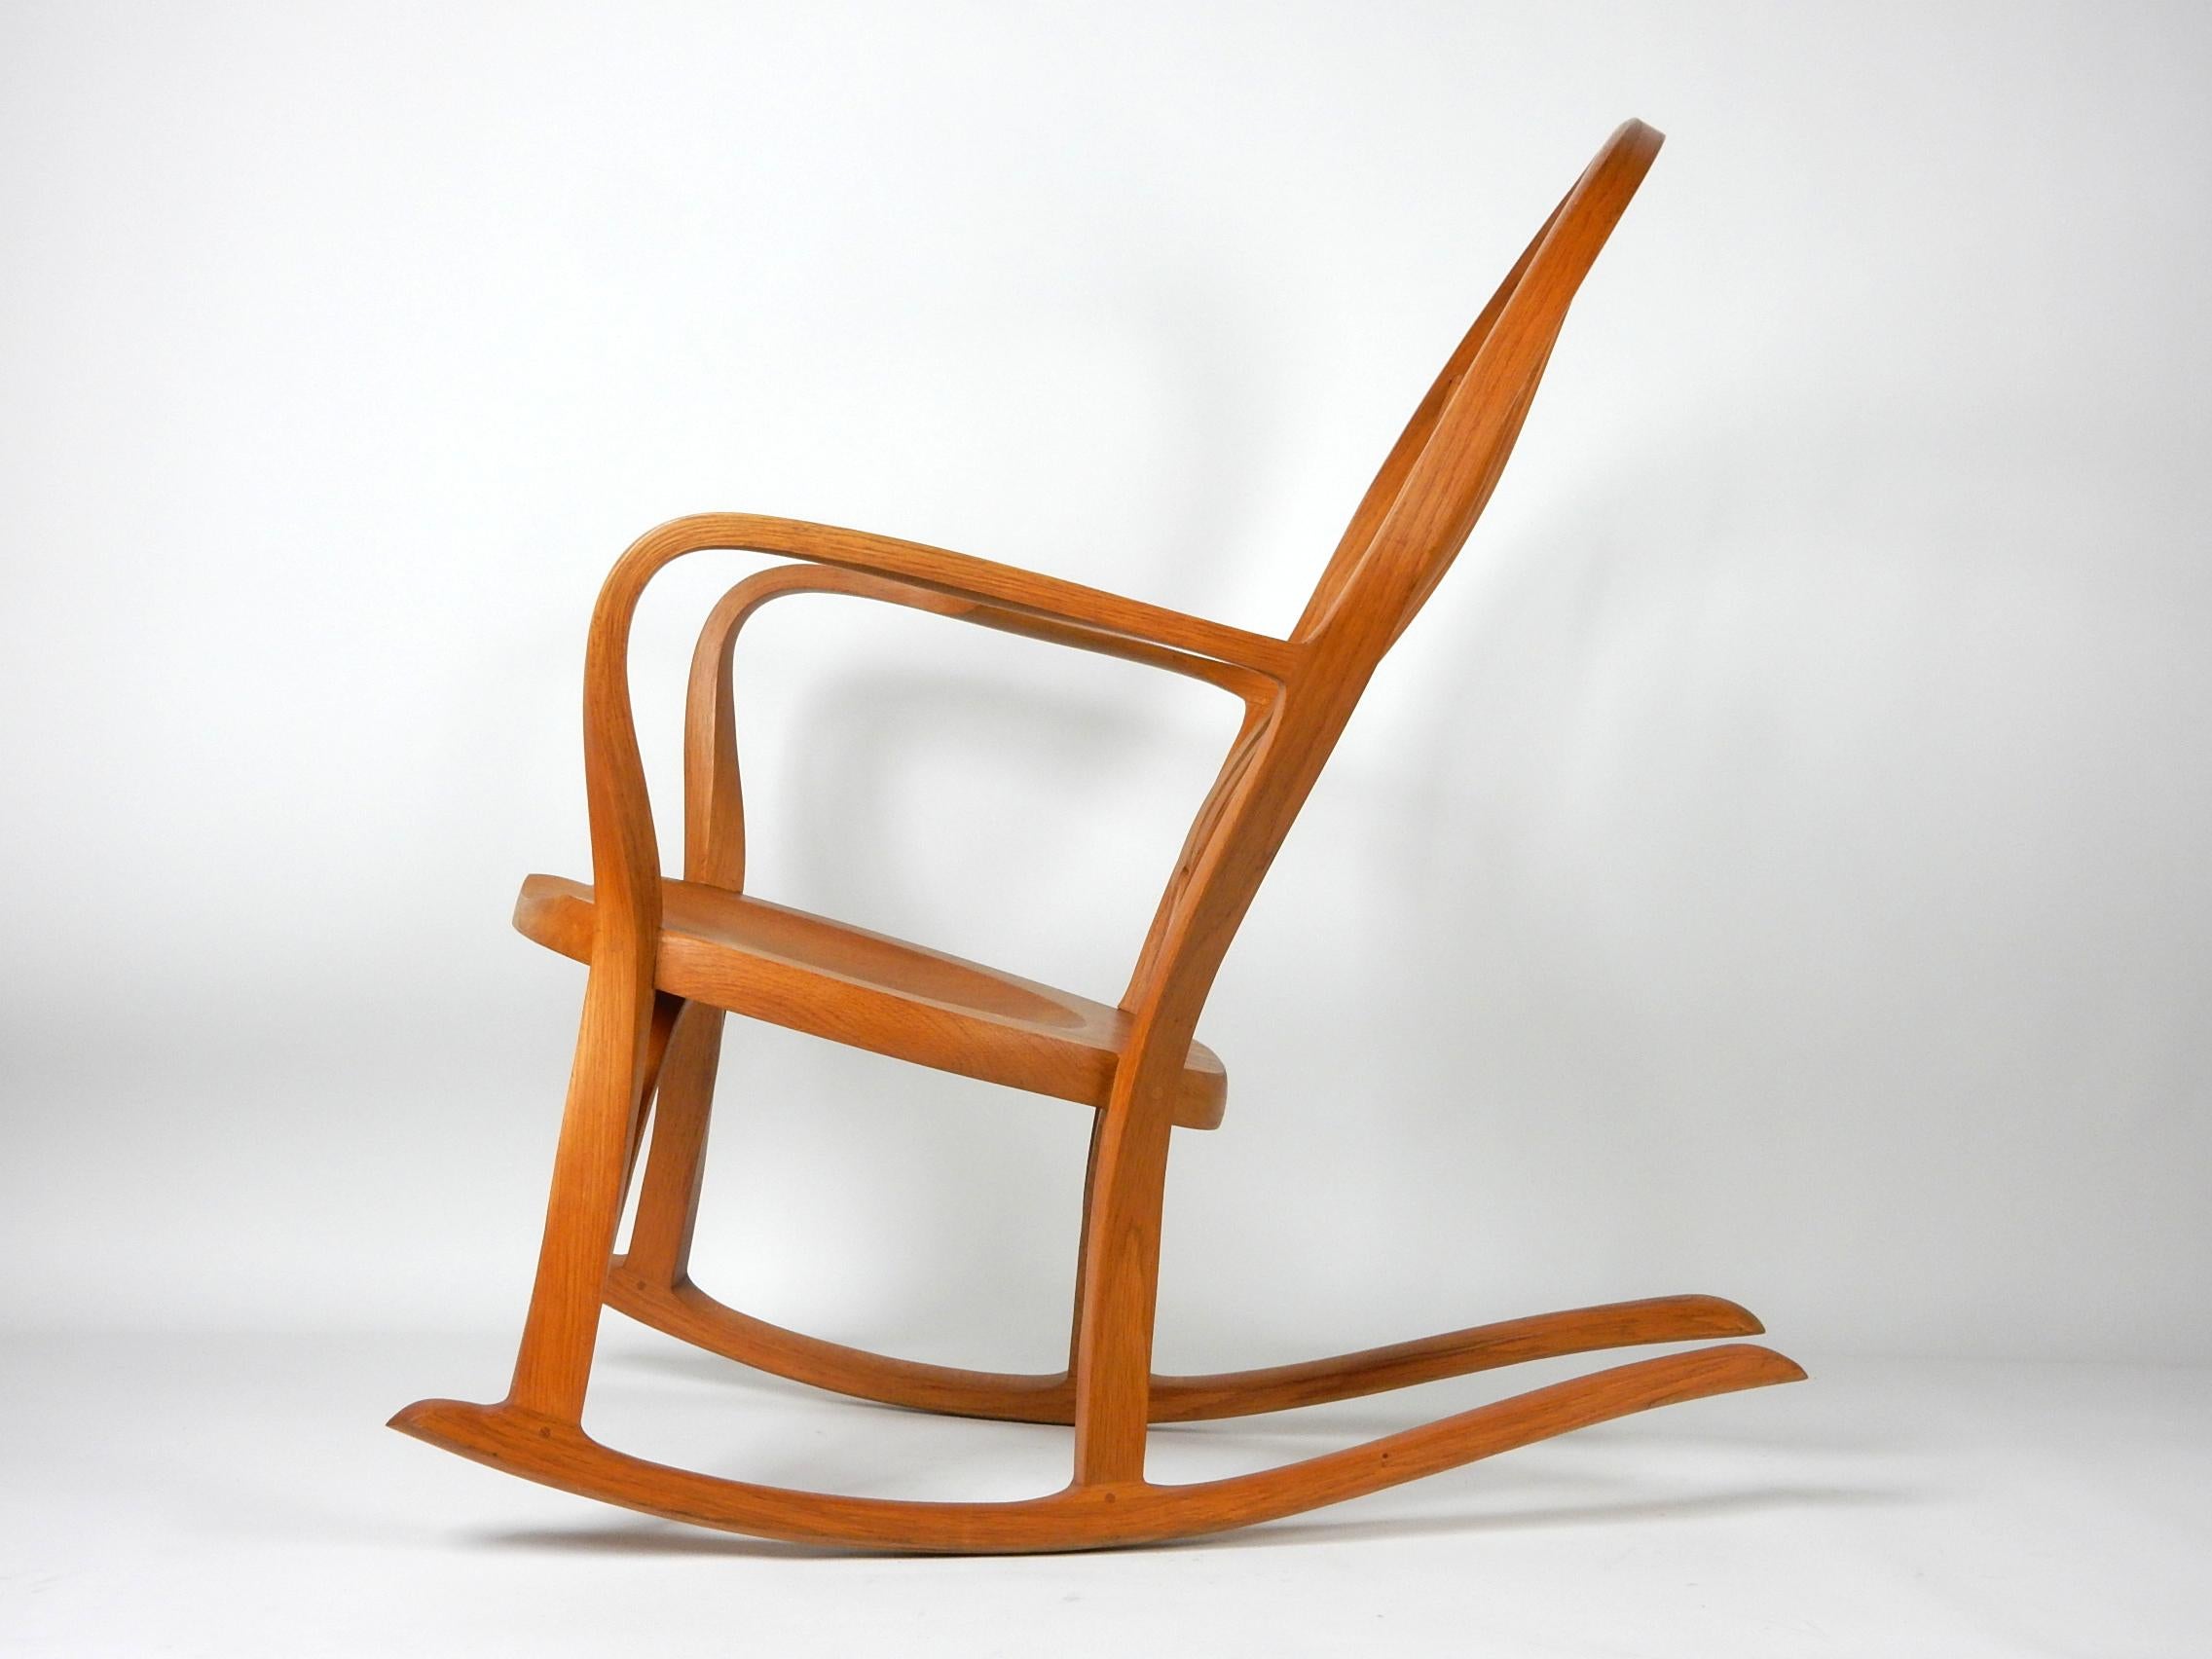 Sculptural rocking chair in the Sam Maloof style, circa 1970s
Not marked or signed however you can tell it was created
by a master carpenter.
Made of bent white oak with pegged joints. Solid and
extremely comfortable piece of functional art!
No